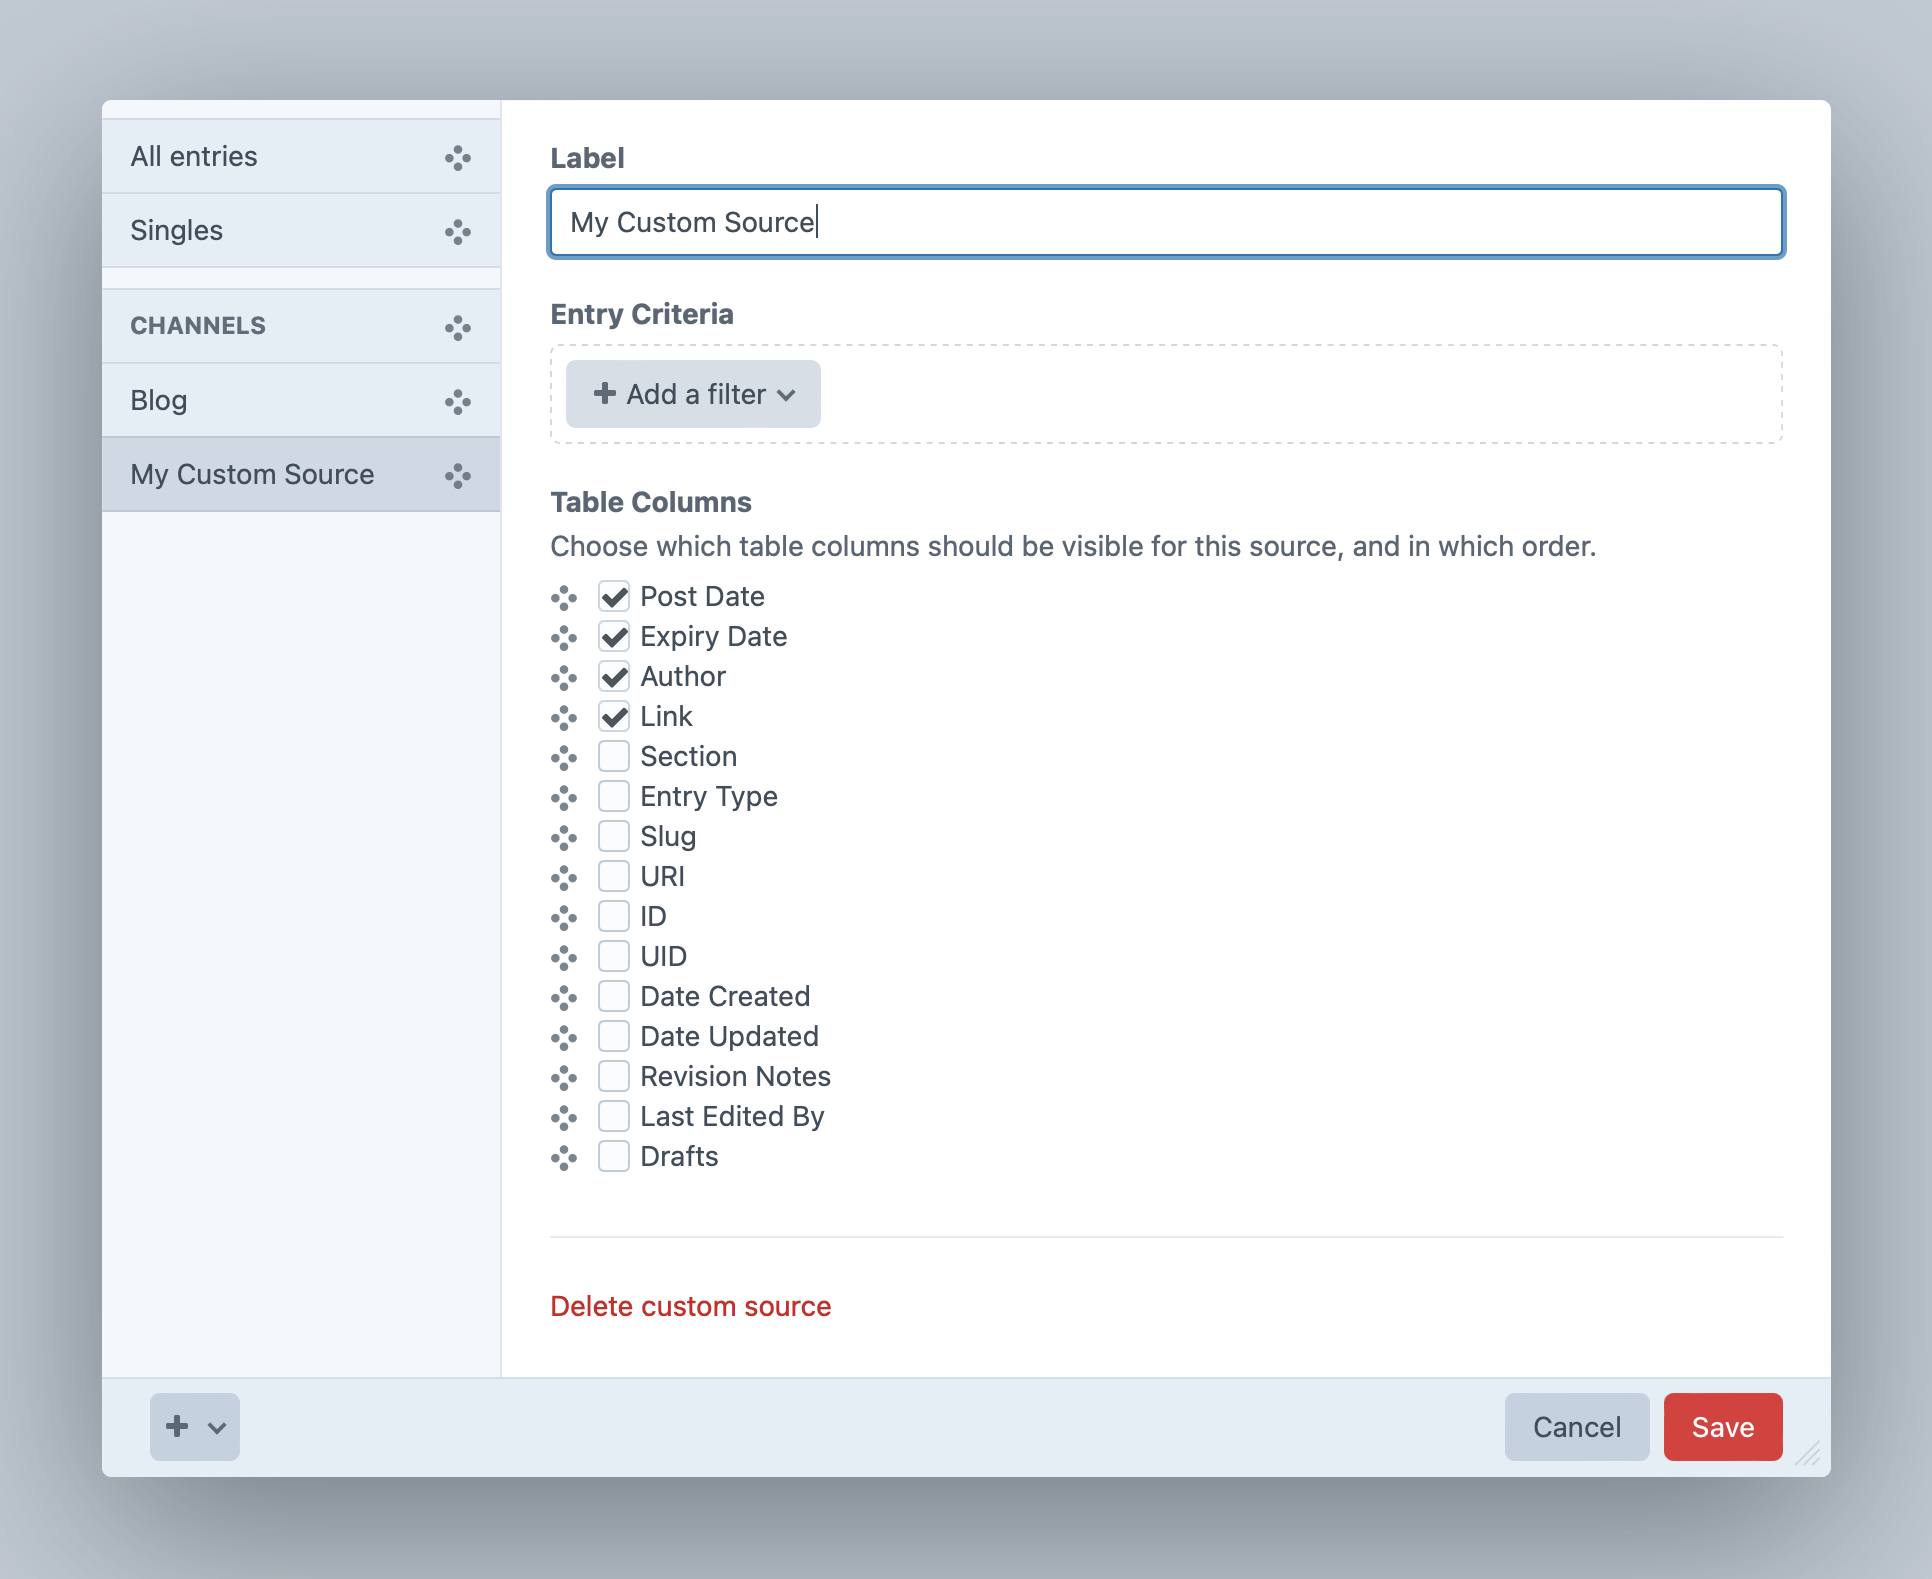 Screenshot of a modal window with fields for a new custom source: Label, Condition Builder, and Table Columns